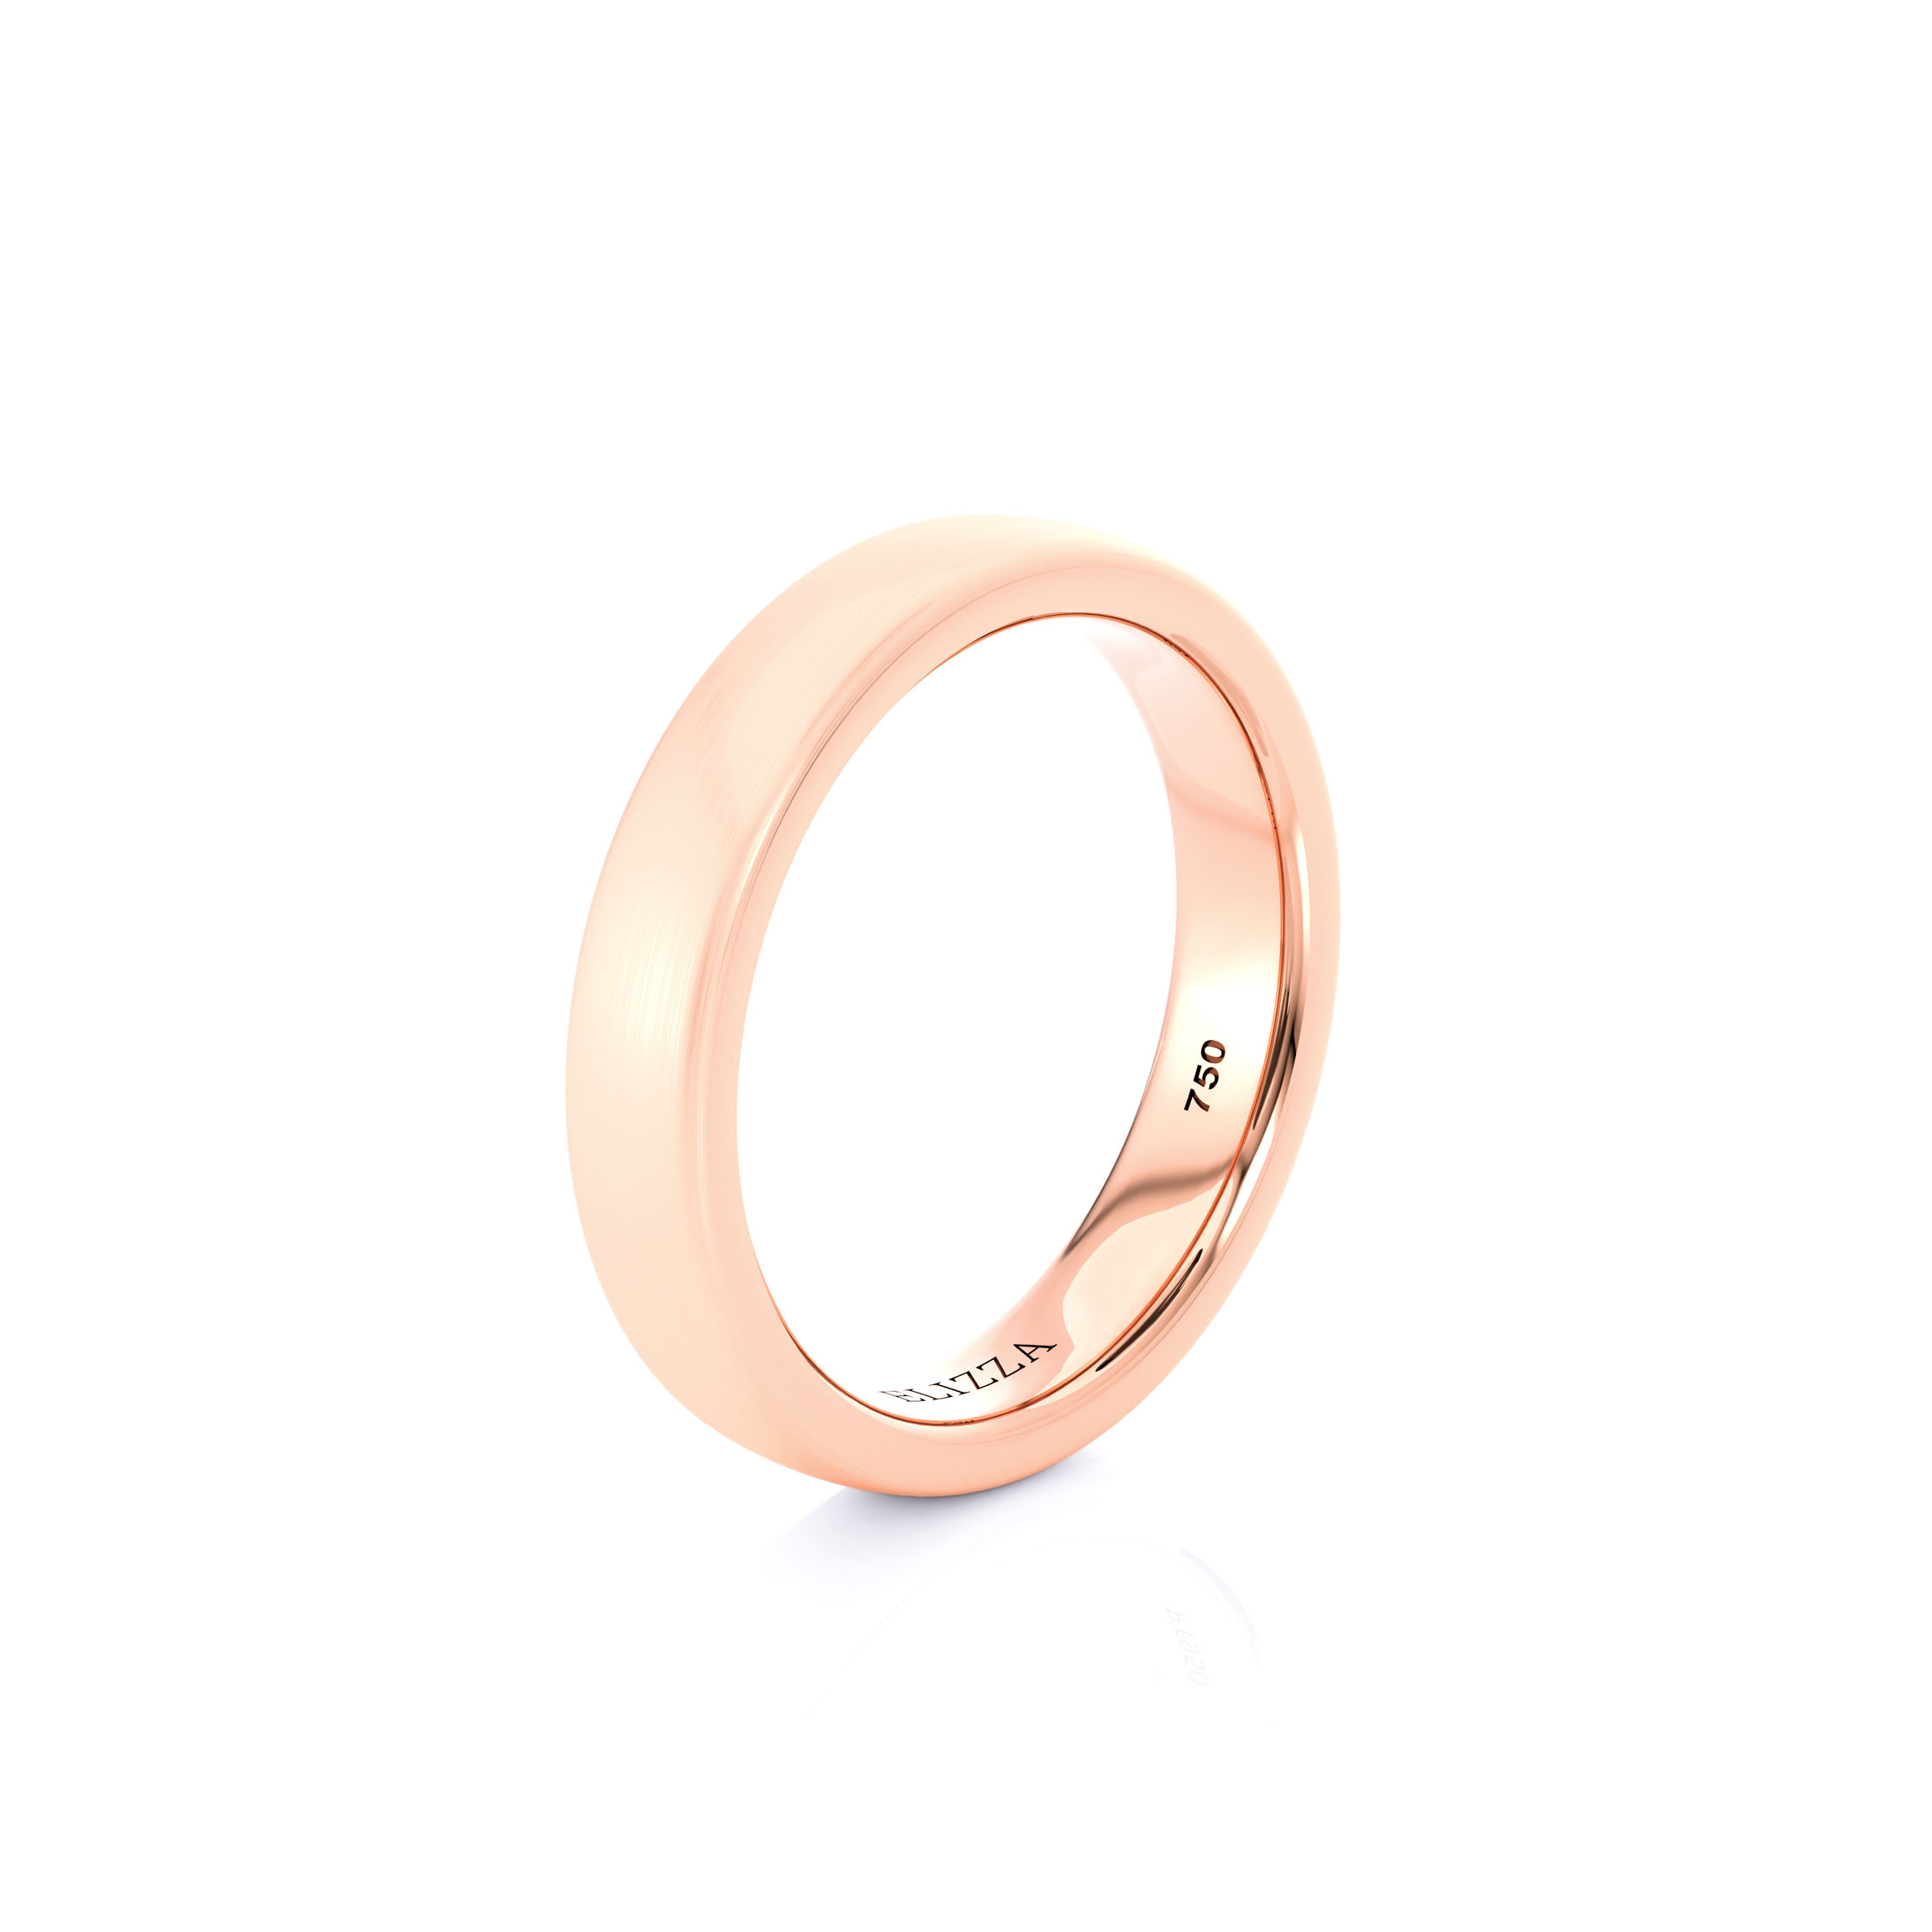 Trauring Eternal Wave Couple | 14K Roségold 5